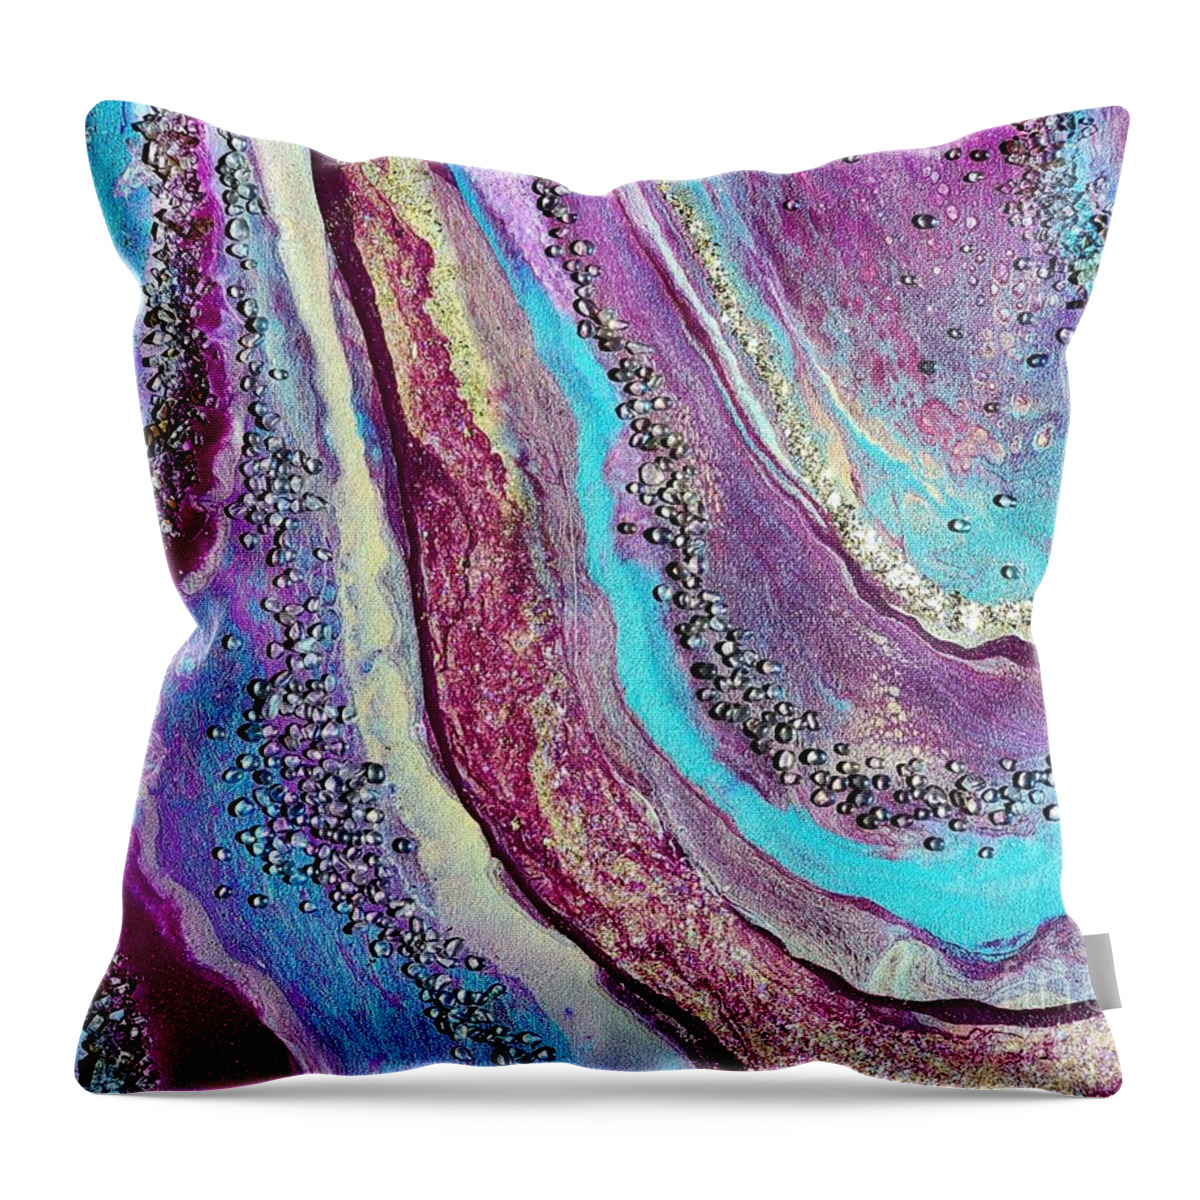 Opalesence Throw Pillow featuring the painting Opalesence by Deborah Ronglien